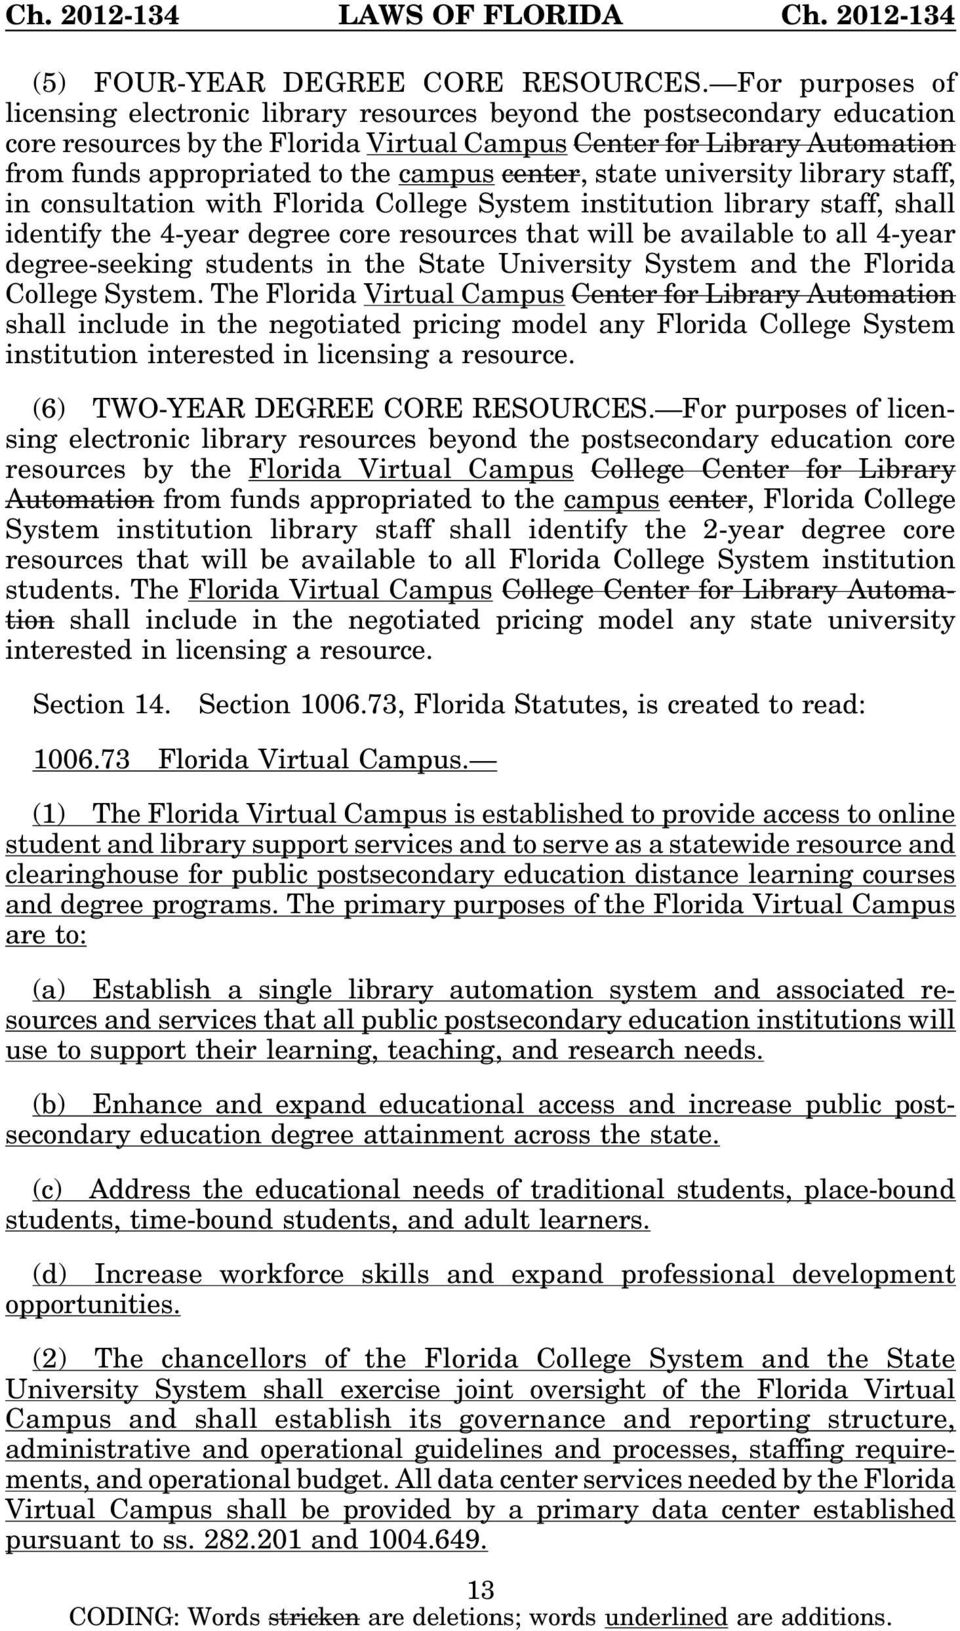 campus center, state university library staff, in consultation with Florida College System institution library staff, shall identify the 4-year degree core resources that will be available to all